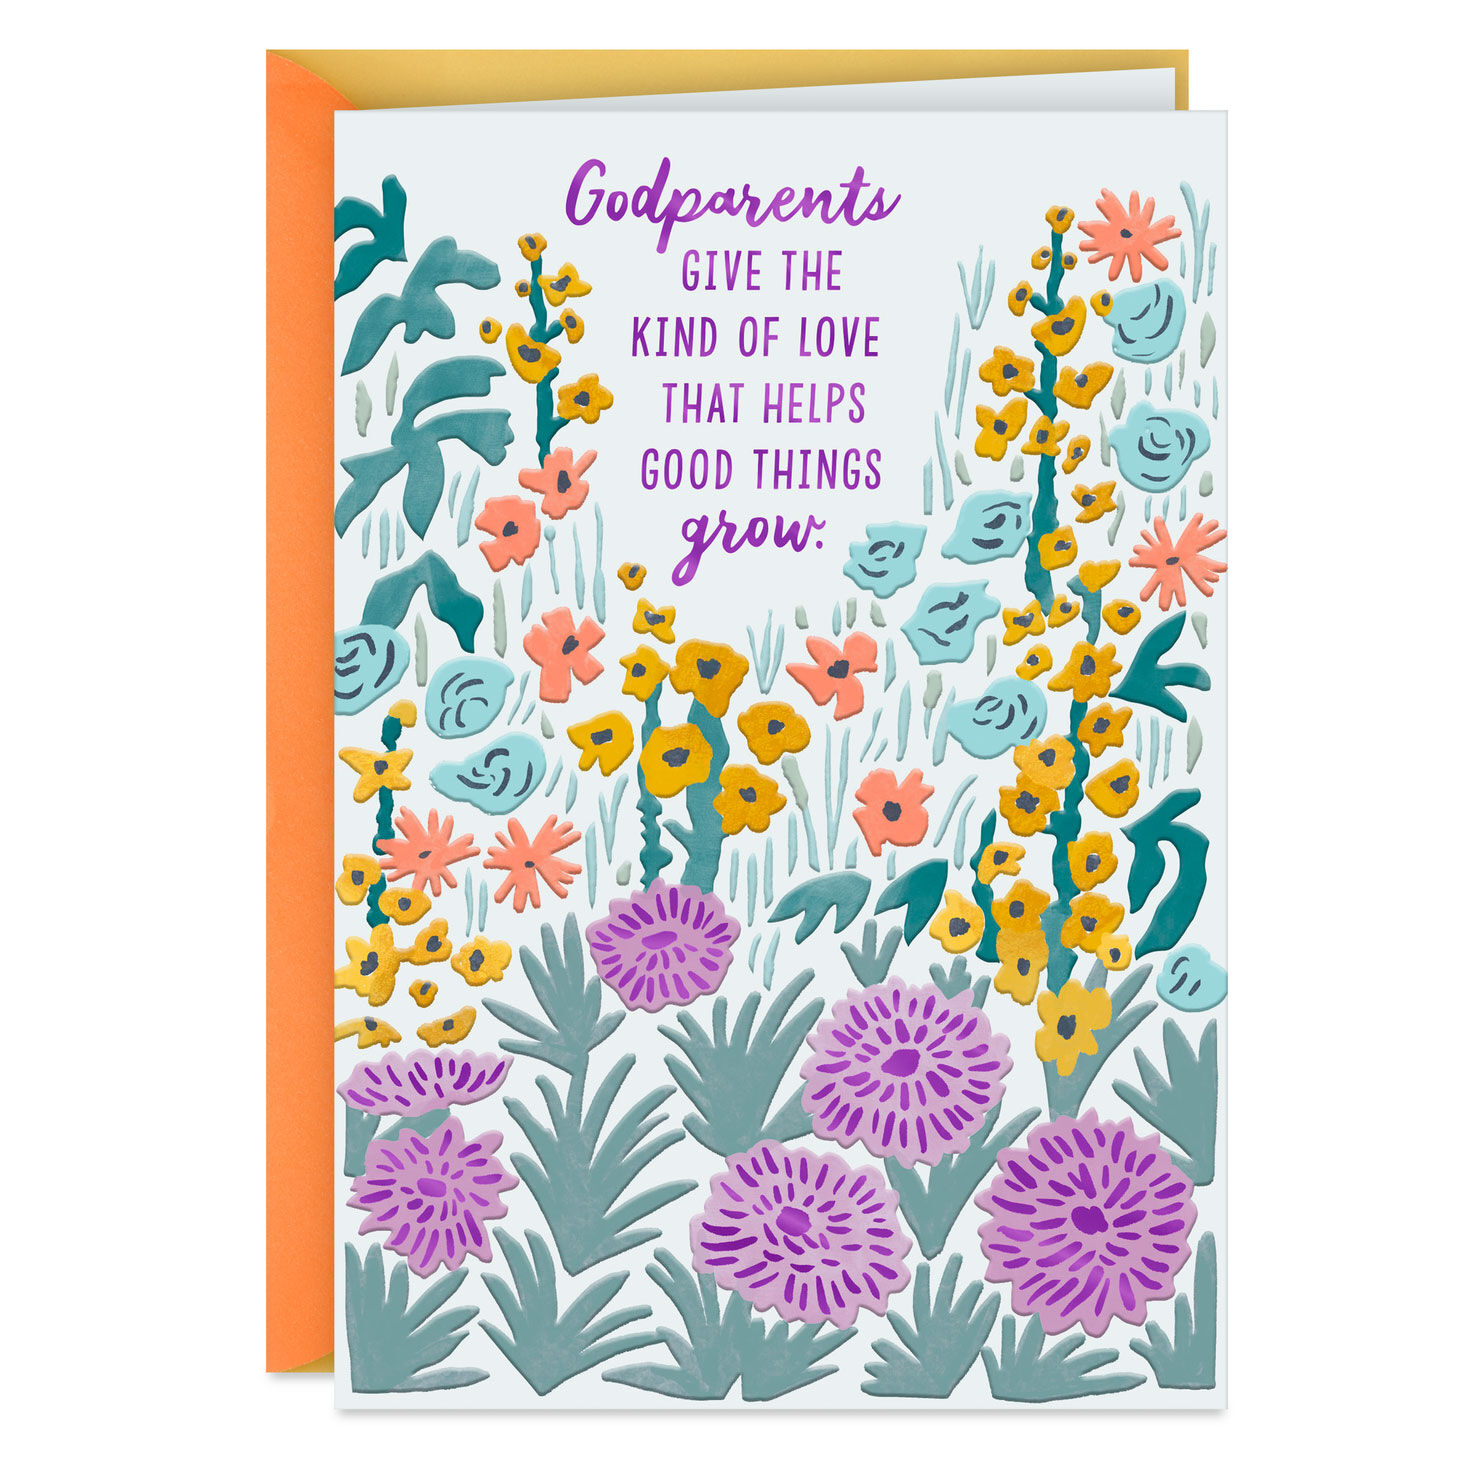 Love Helps Good Things Grow Easter Card for Godparents for only USD 2.99 | Hallmark